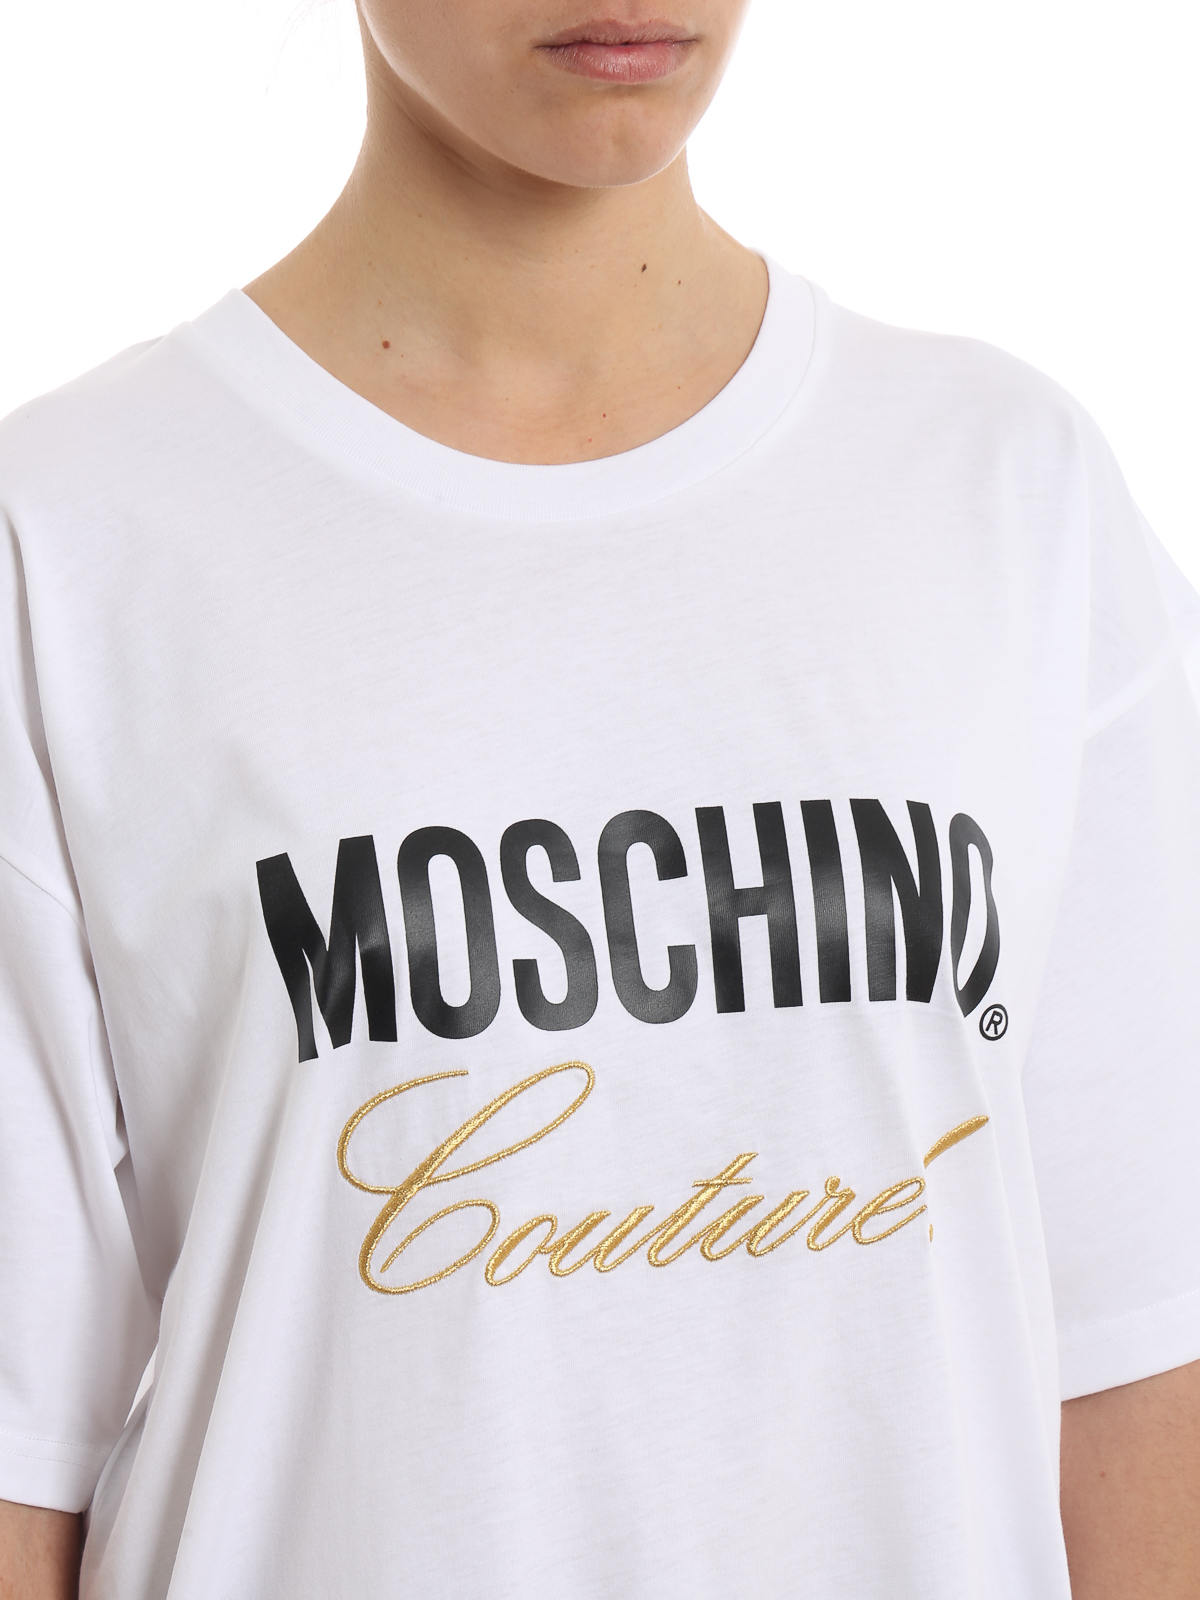 Moschino Couture T Shirt Outlet, 60% OFF | www.al-anon.be